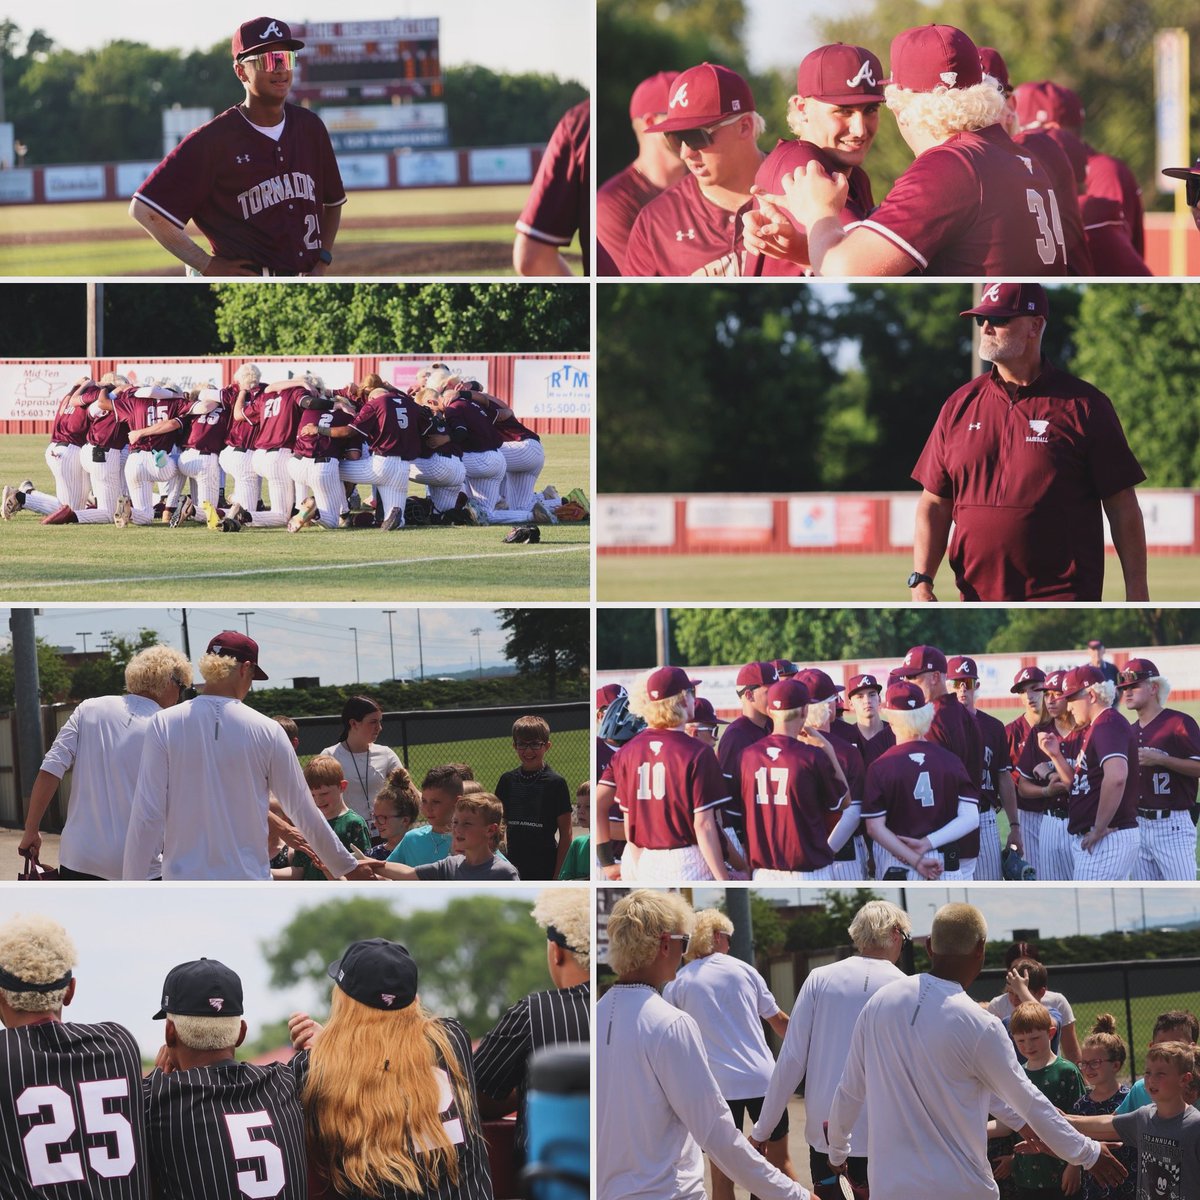 As we kick off this weekend we want to celebrate the season of @alcoa_baseball! From setting records to reaching the state tourney for the first time in 20 years this team truly gave their all to the A! Join us in thanking these incredible young men on one #TooHype season! ⚾️🌪